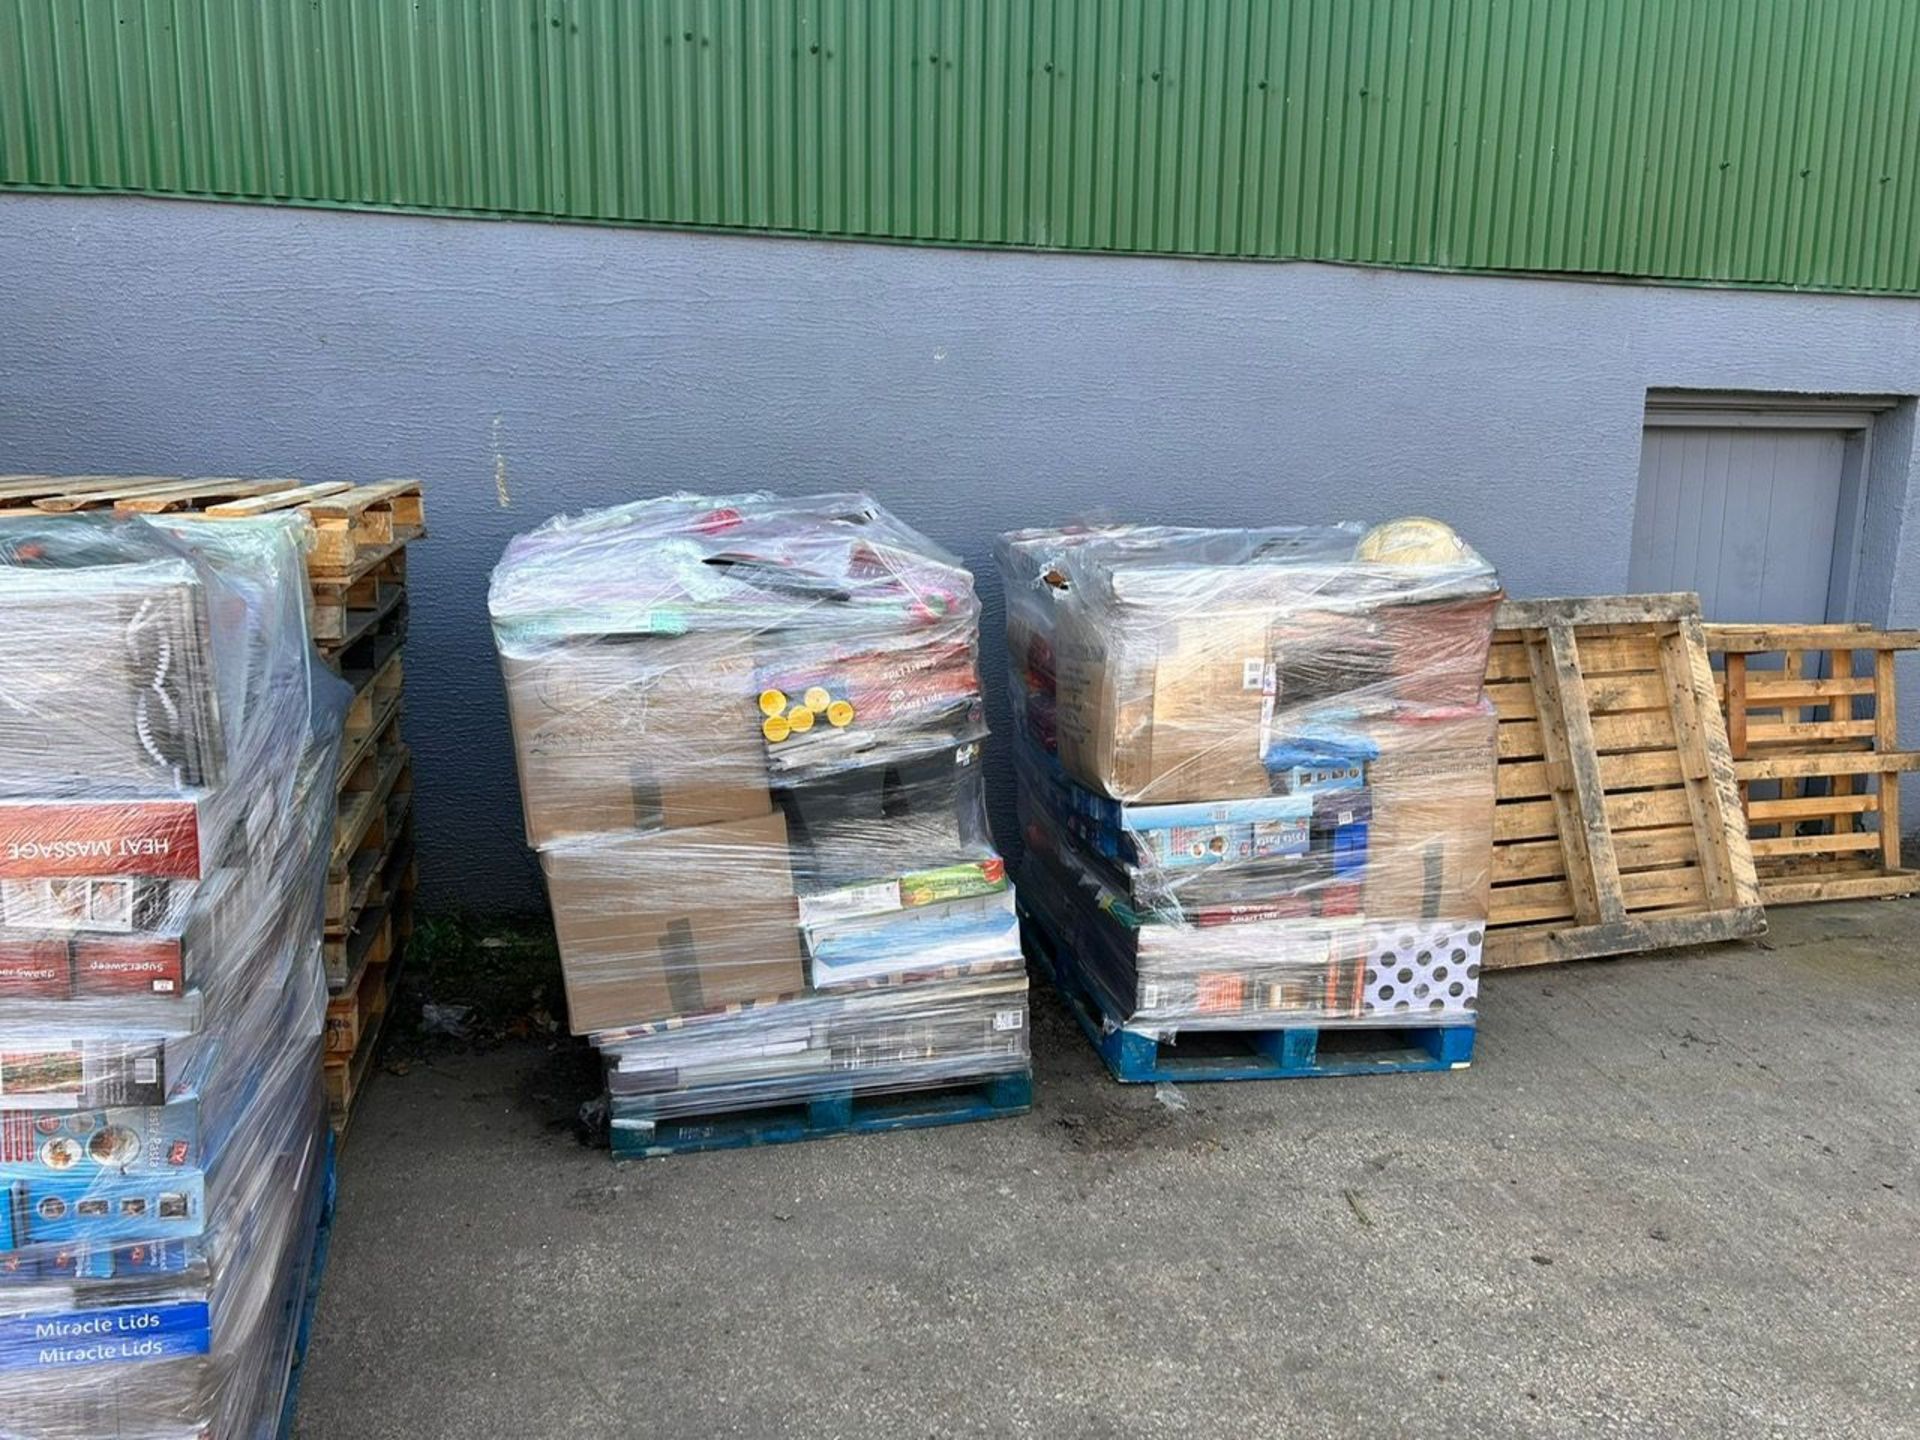 Large Pallet of Unchecked Supermarket Stock. Huge variety of items which may include: tools, toys, - Image 15 of 18